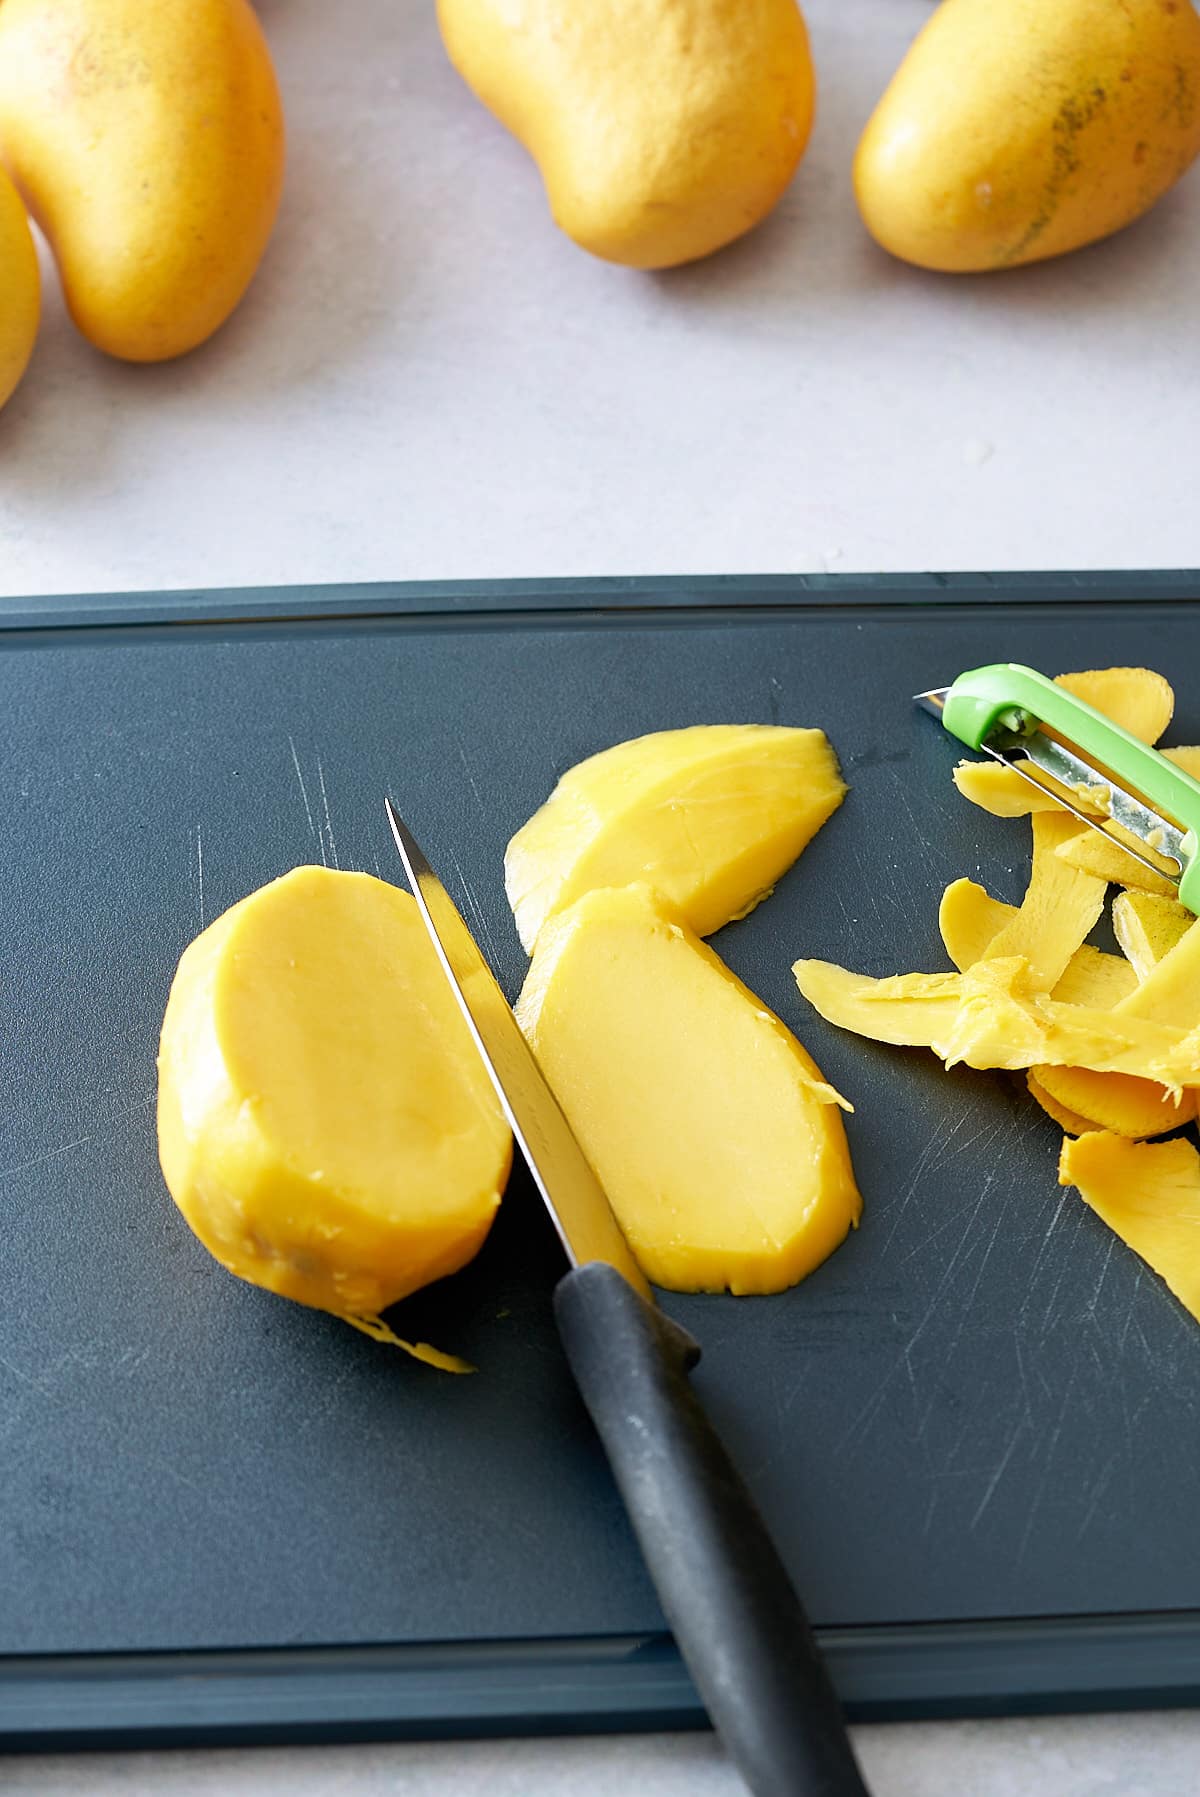 mango being sliced with knife on black cutting board